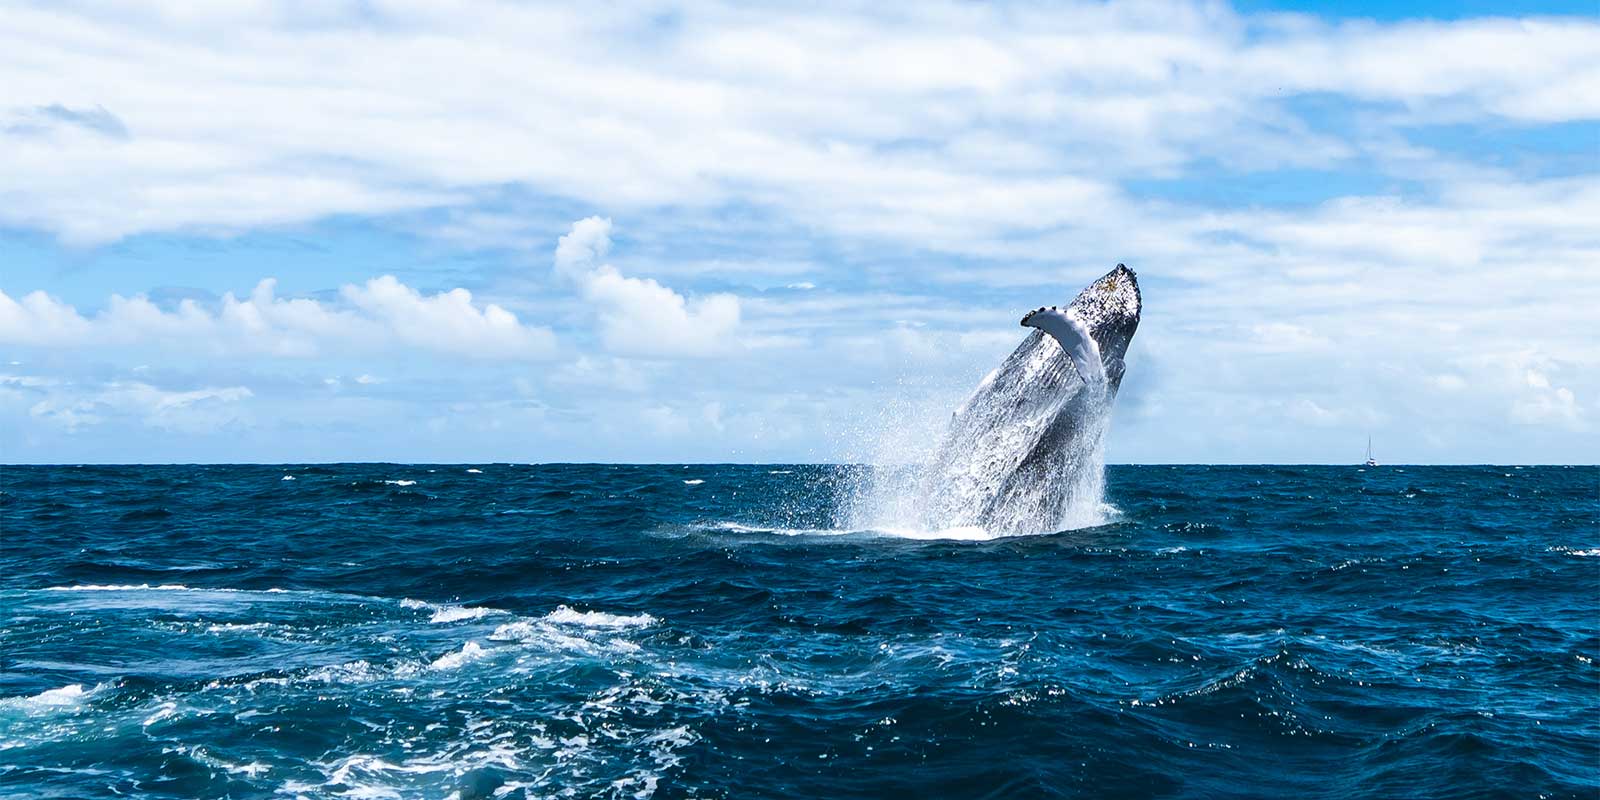 Humpback whale in the Dominican Republic